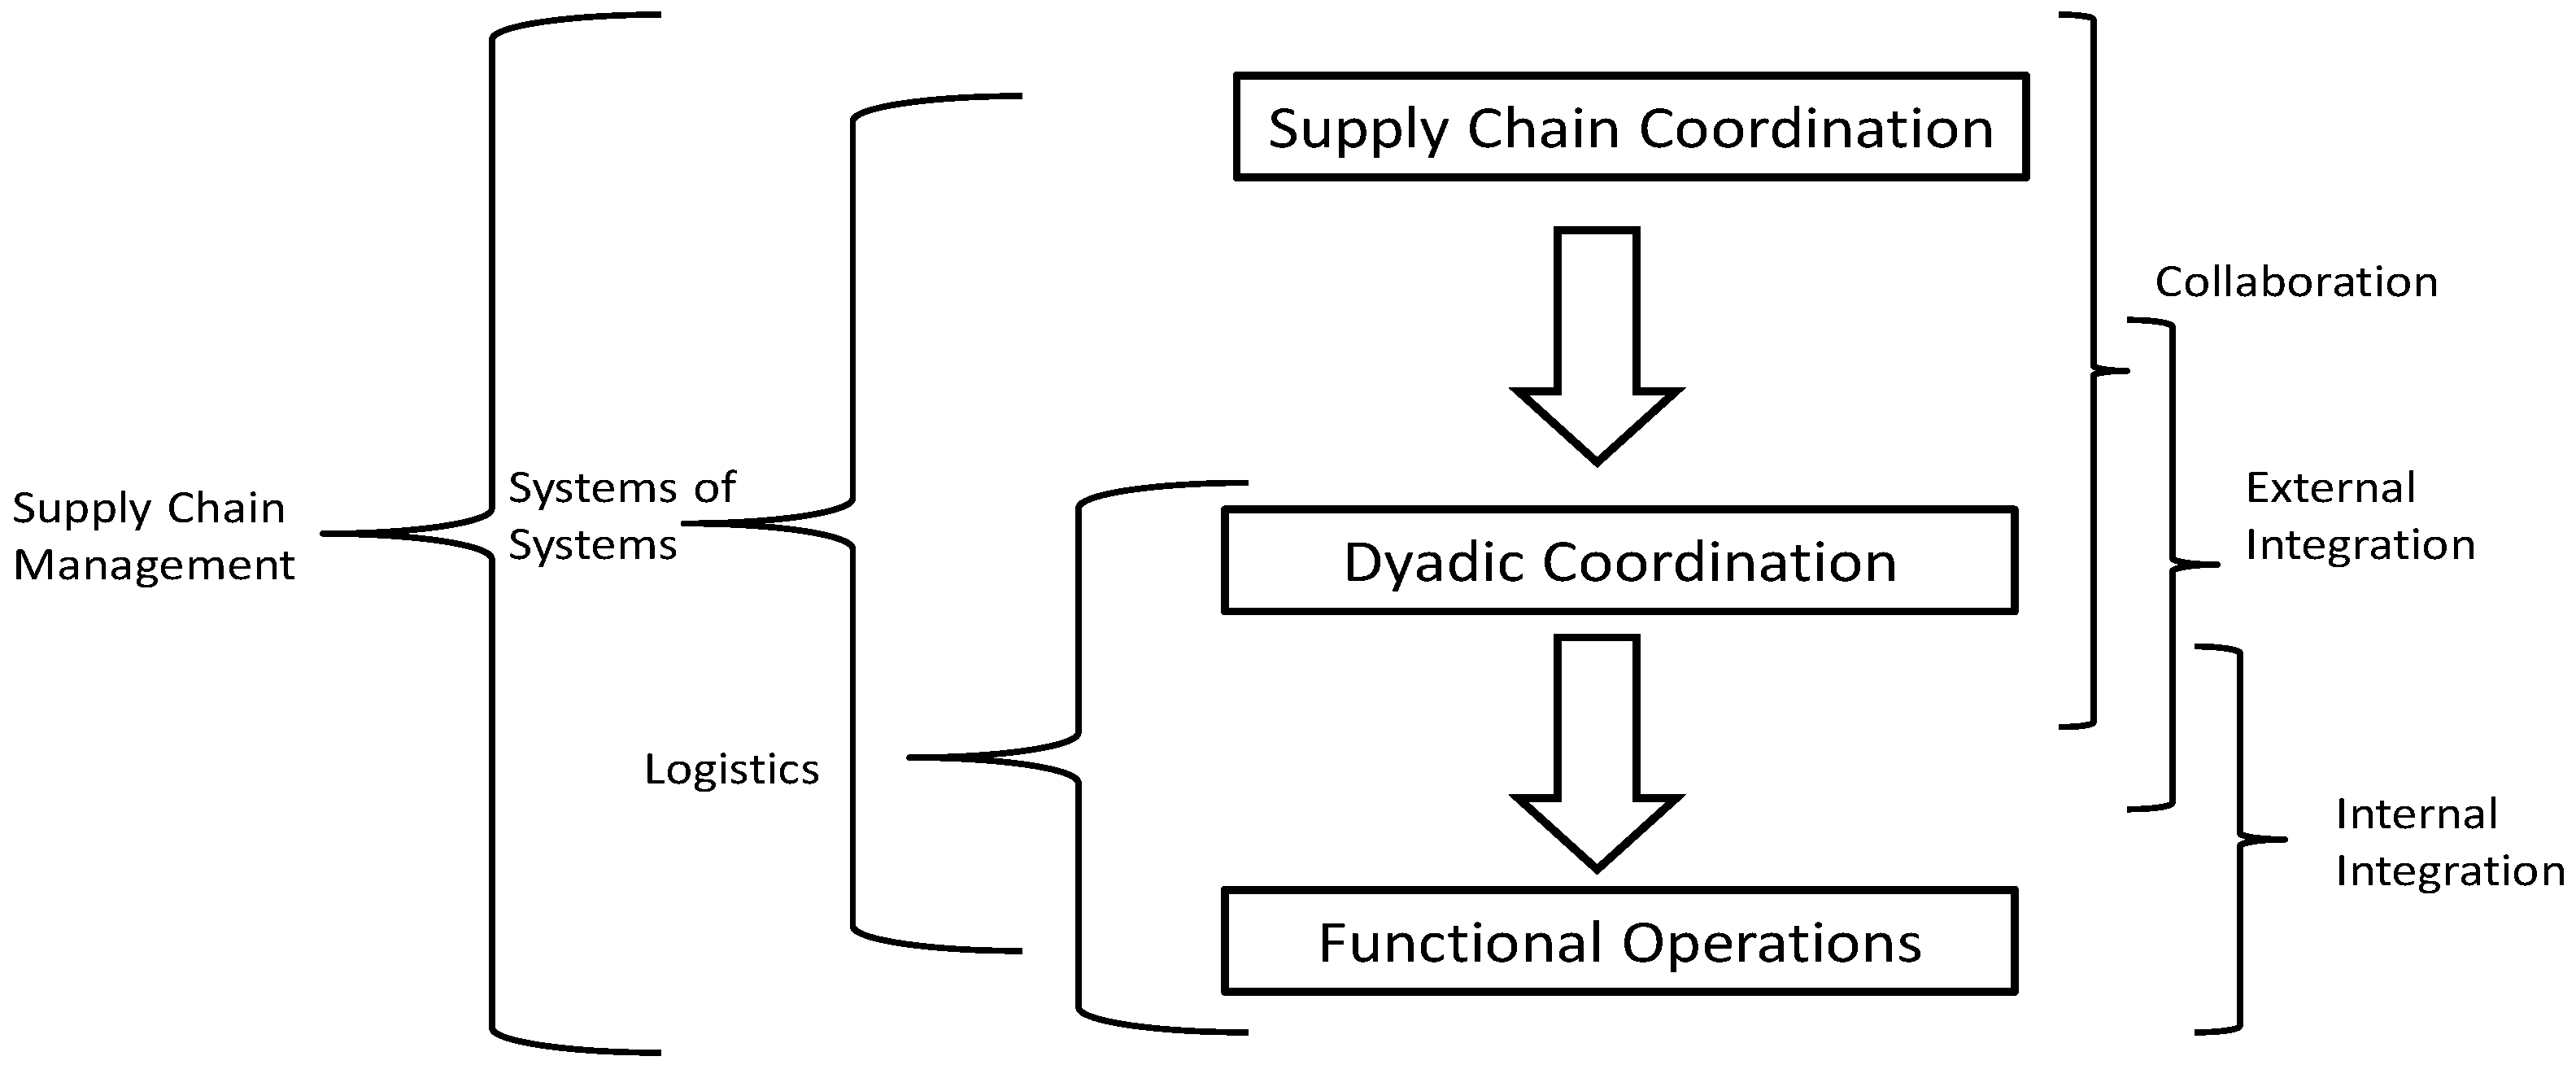 Systems | Free Full-Text | The Complementary Perspective of System of  Systems in Collaboration, Integration, and Logistics: A Value-Chain Based  Paradigm of Supply Chain Management